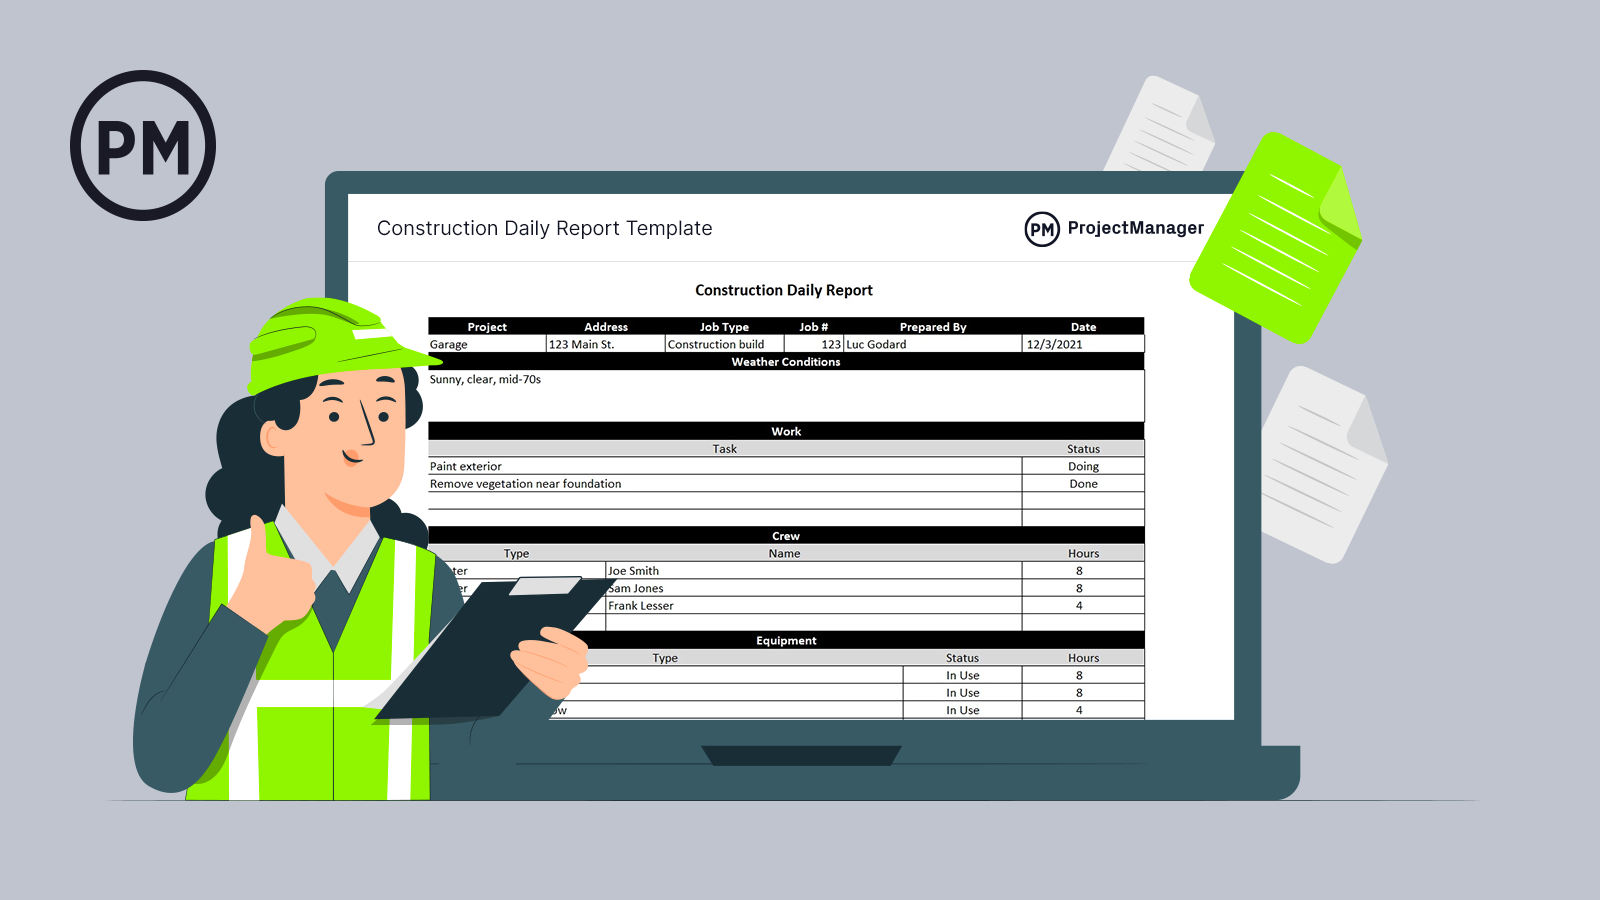 Construction Reporting: Types of Construction Reports